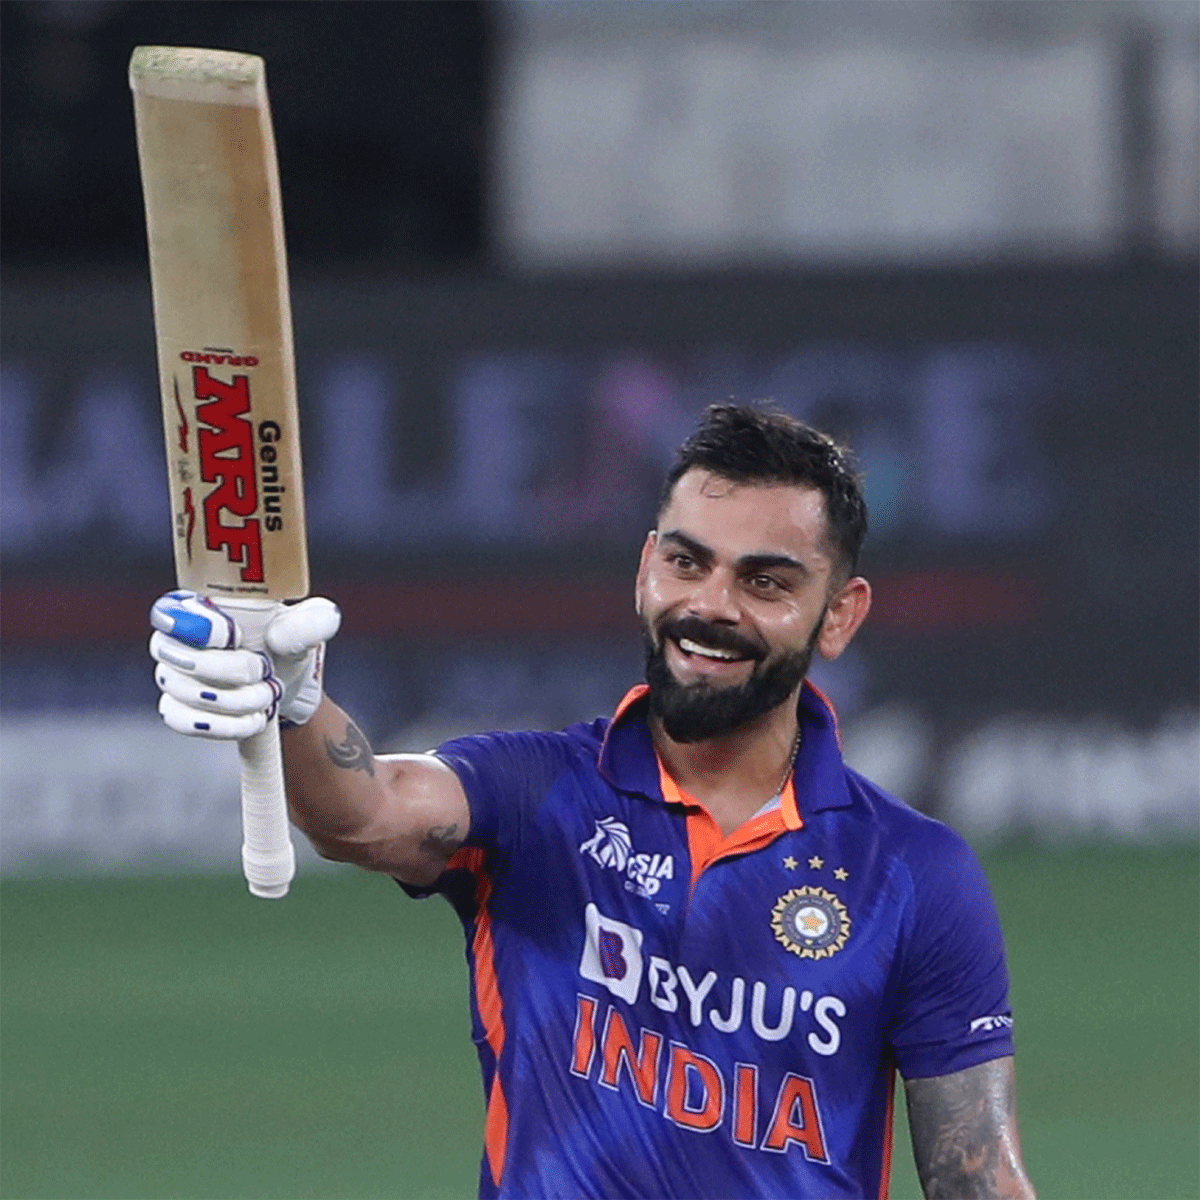 Virat Kohli has opened for India in nine T20Is, scoring 400 runs at an average of 57.14 with a superb strike rate of 161.29.